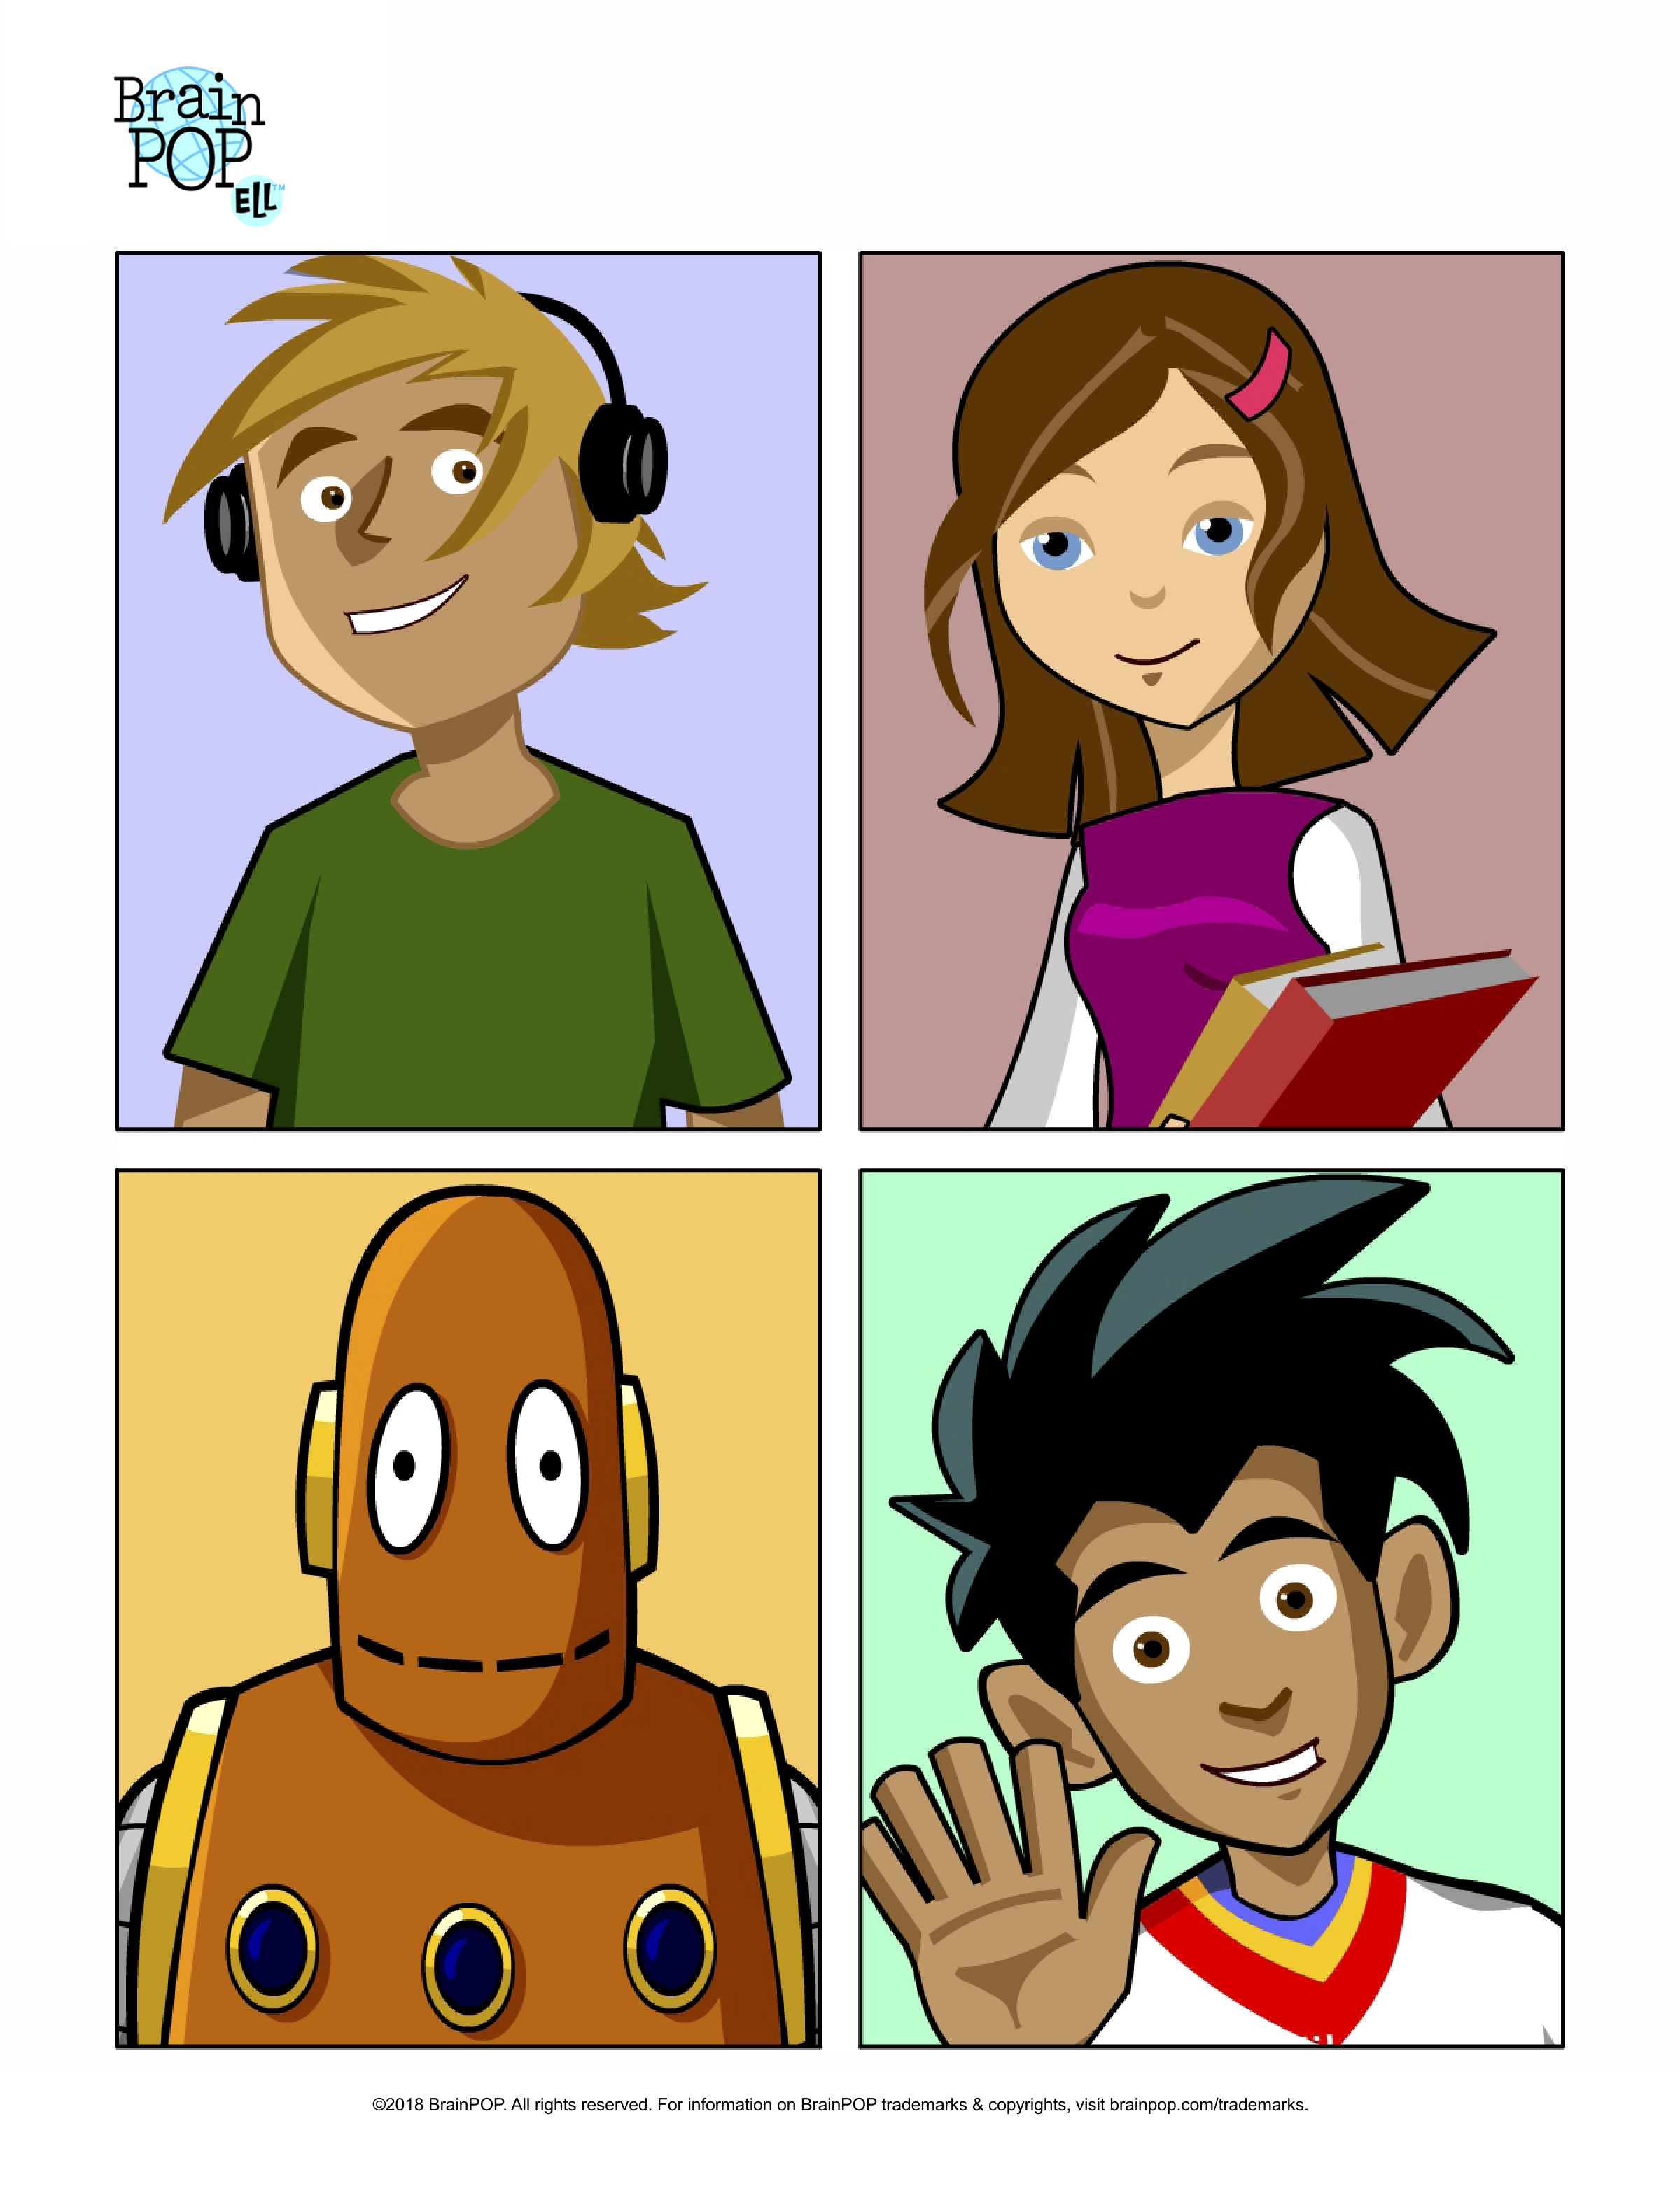 The Four BrainPOP ELL Characters